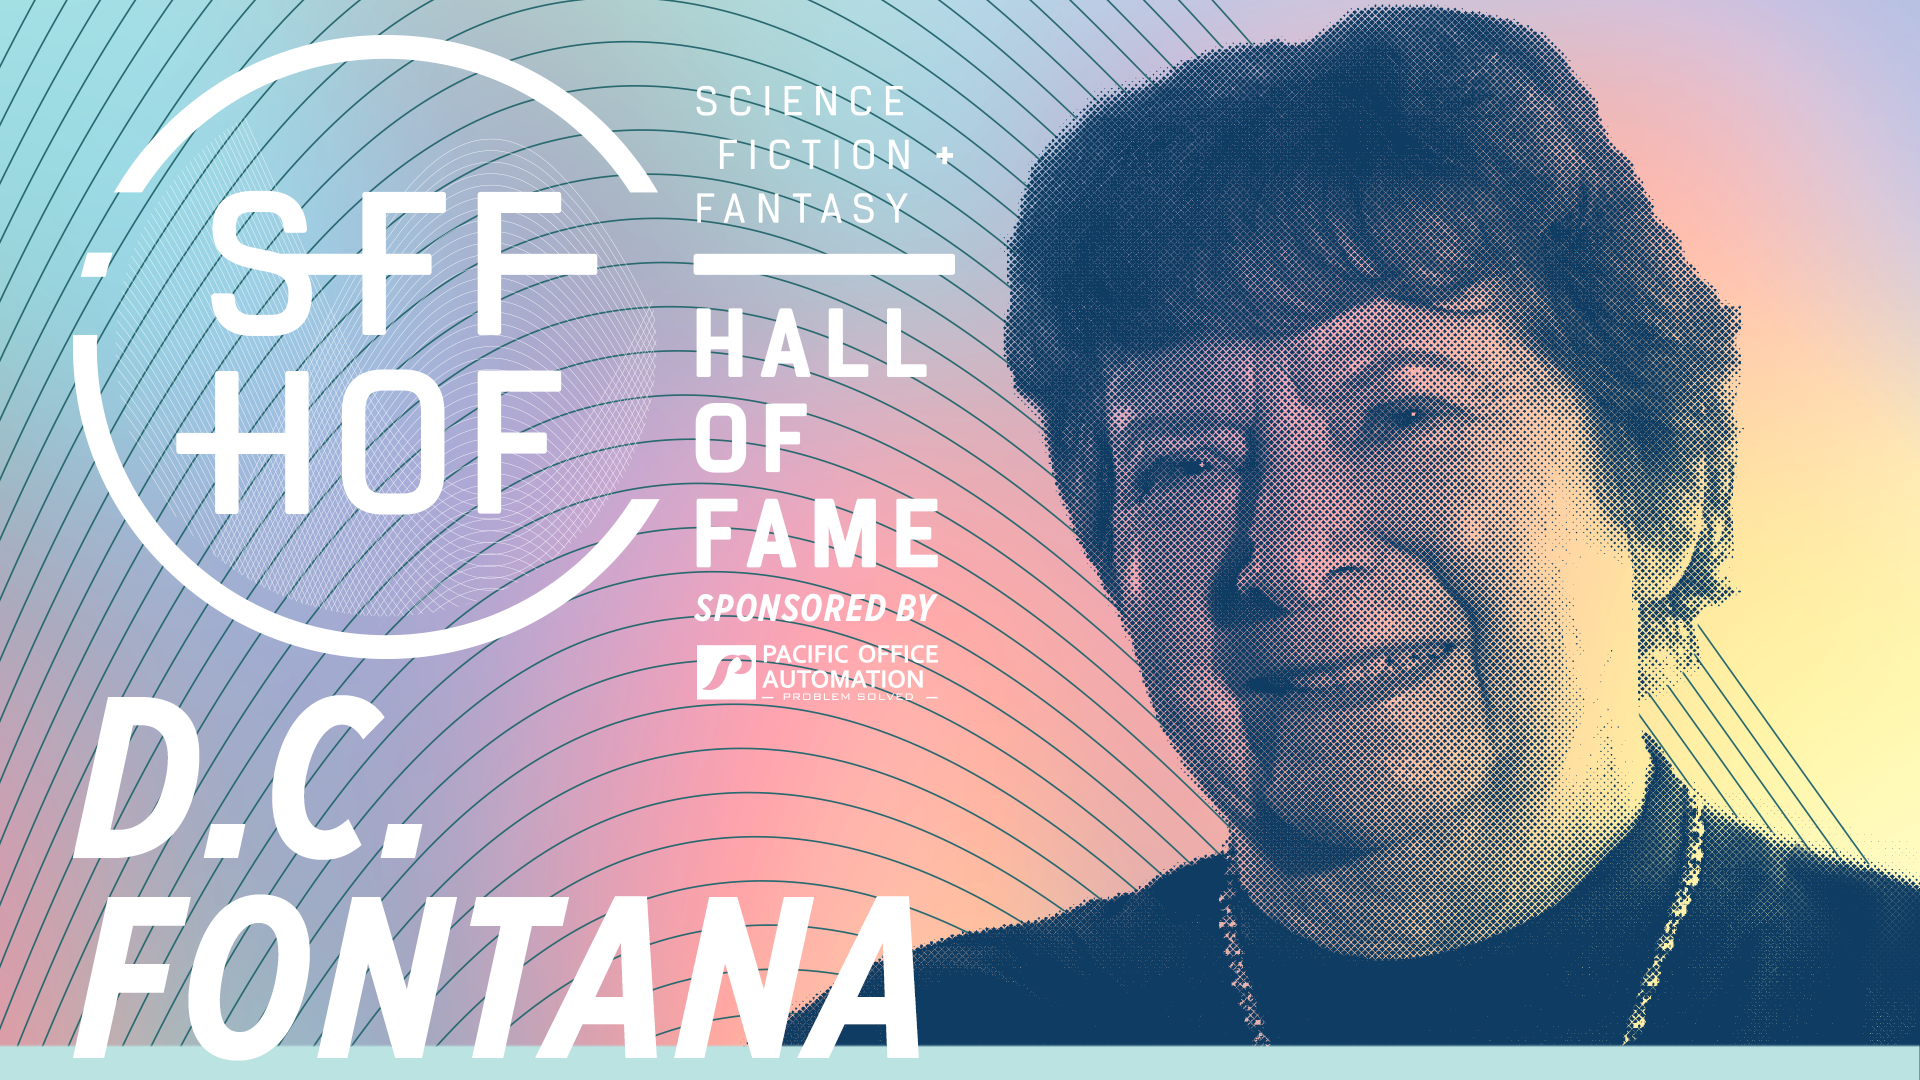 MoPOP Science Fiction + Fantasy Hall of Fame inductee graphic for D.C. Fontana